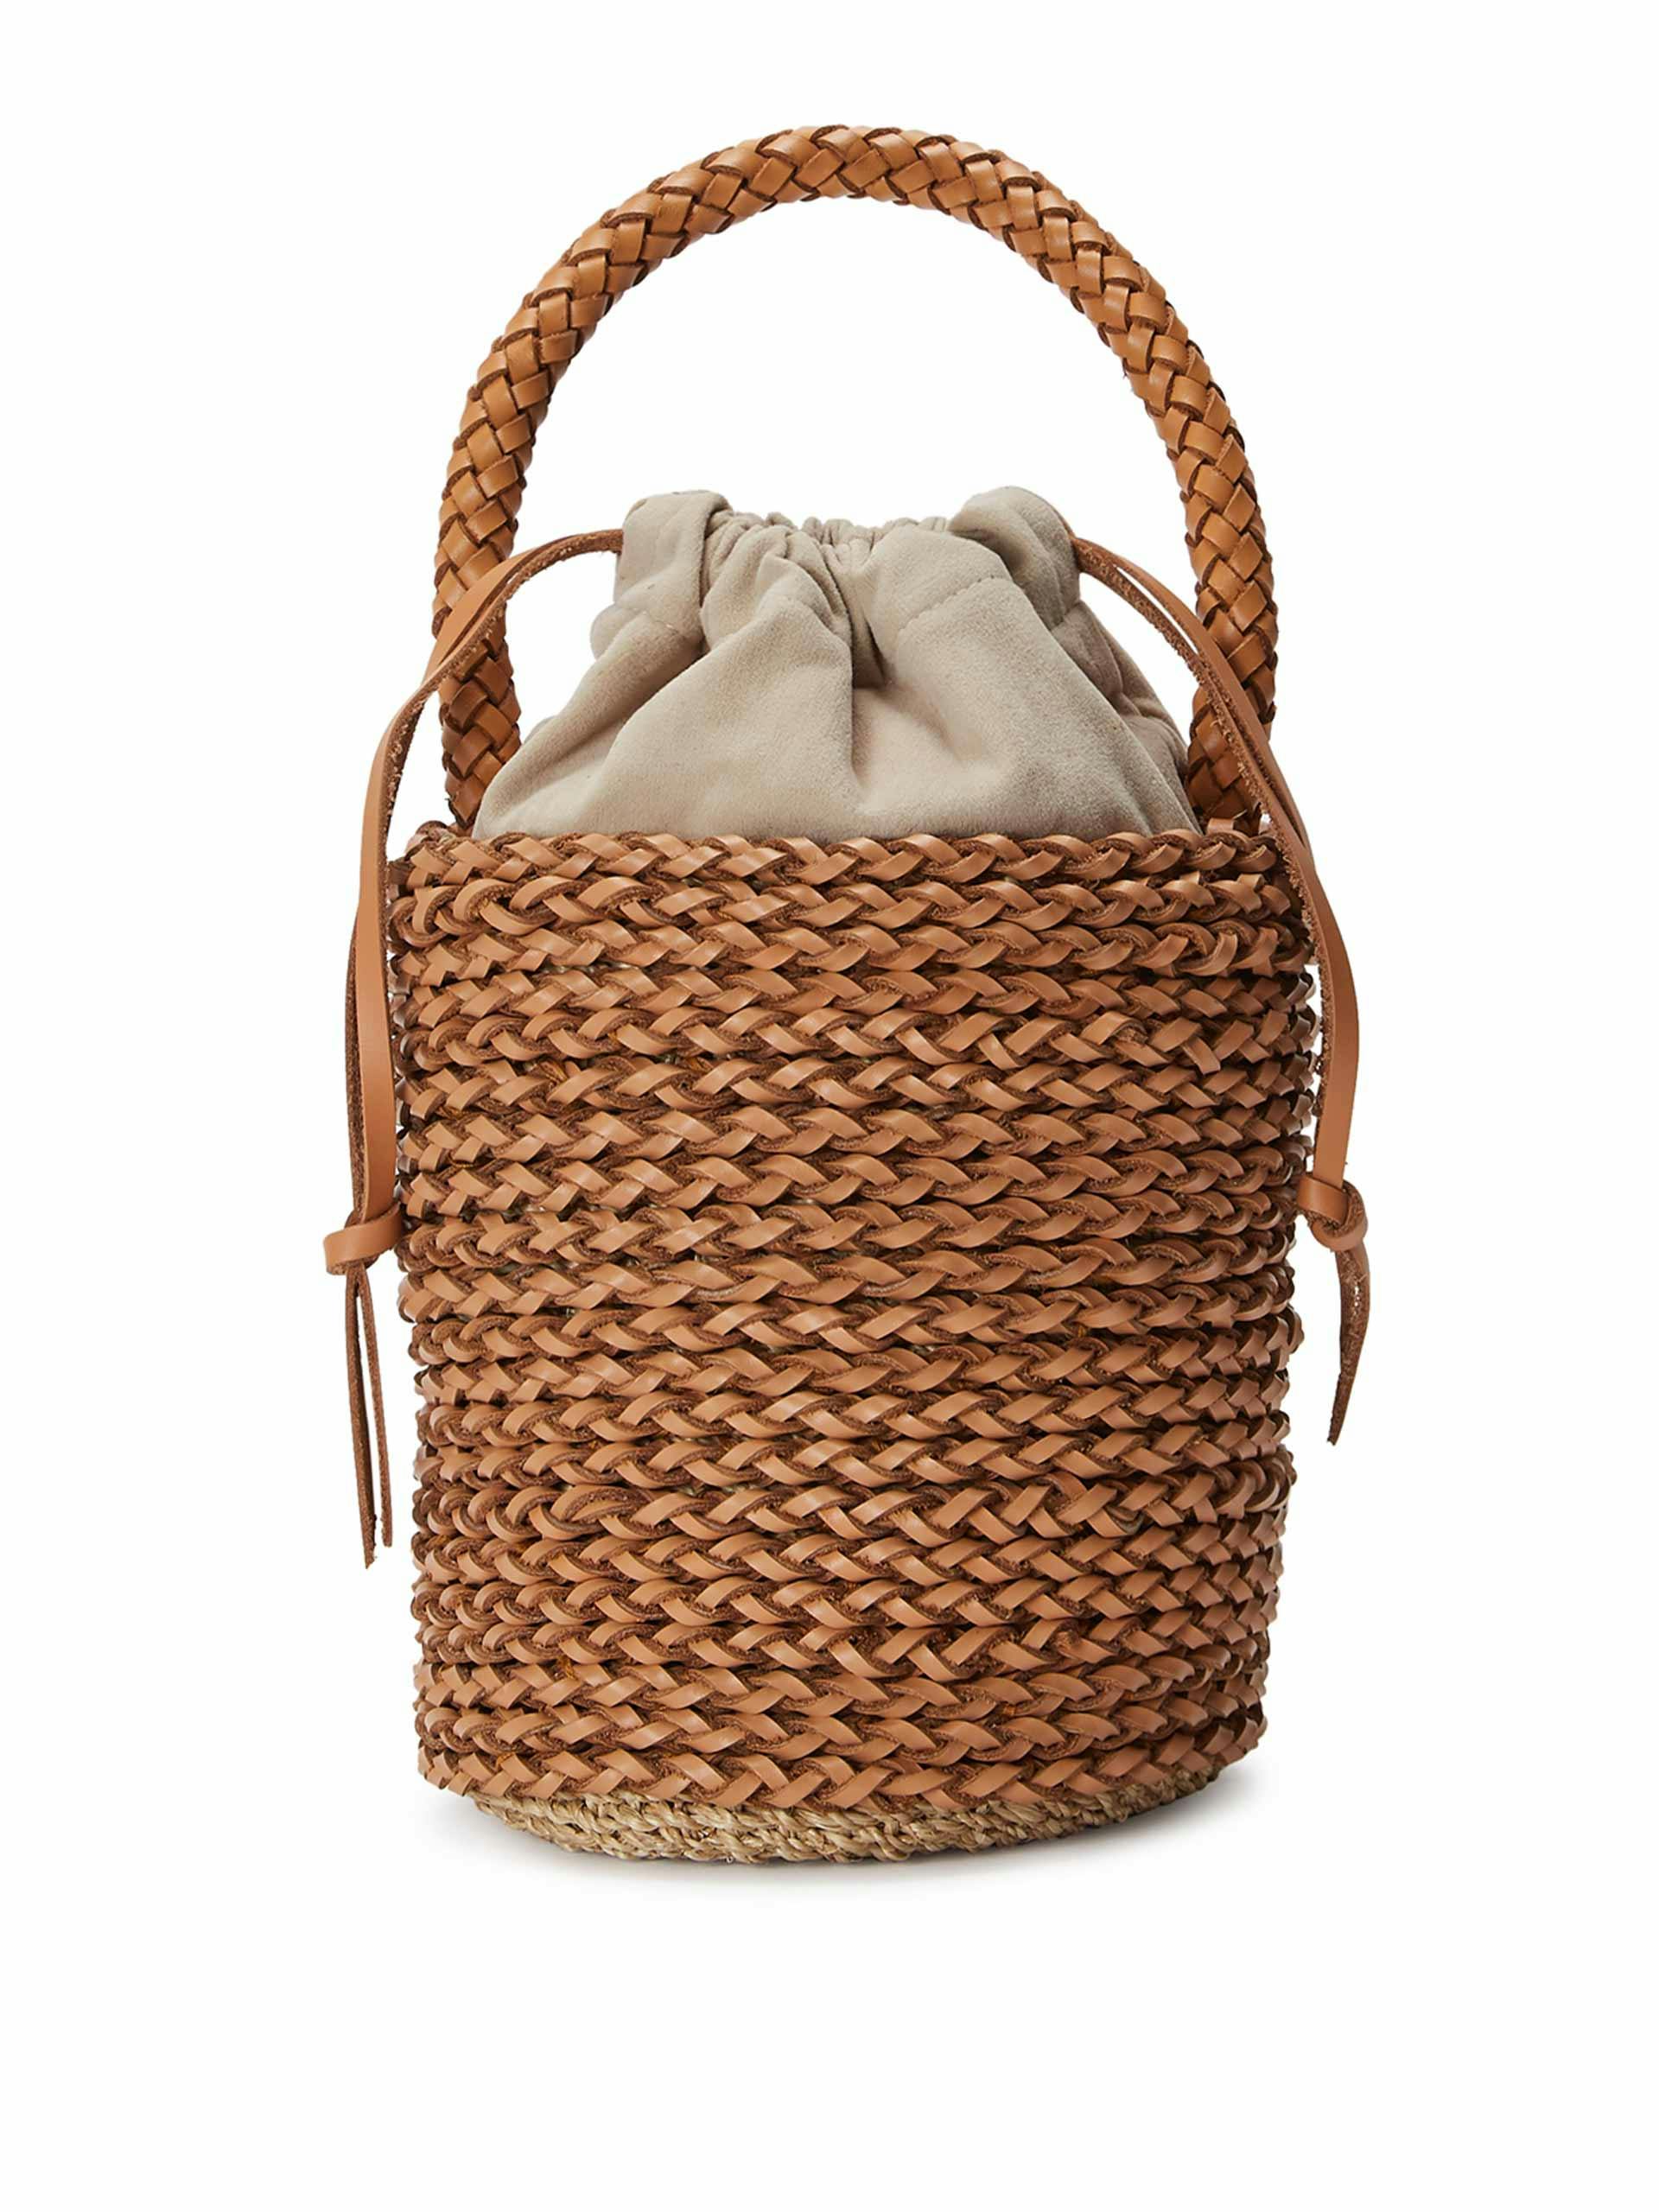 Brown woven leather bucket bag